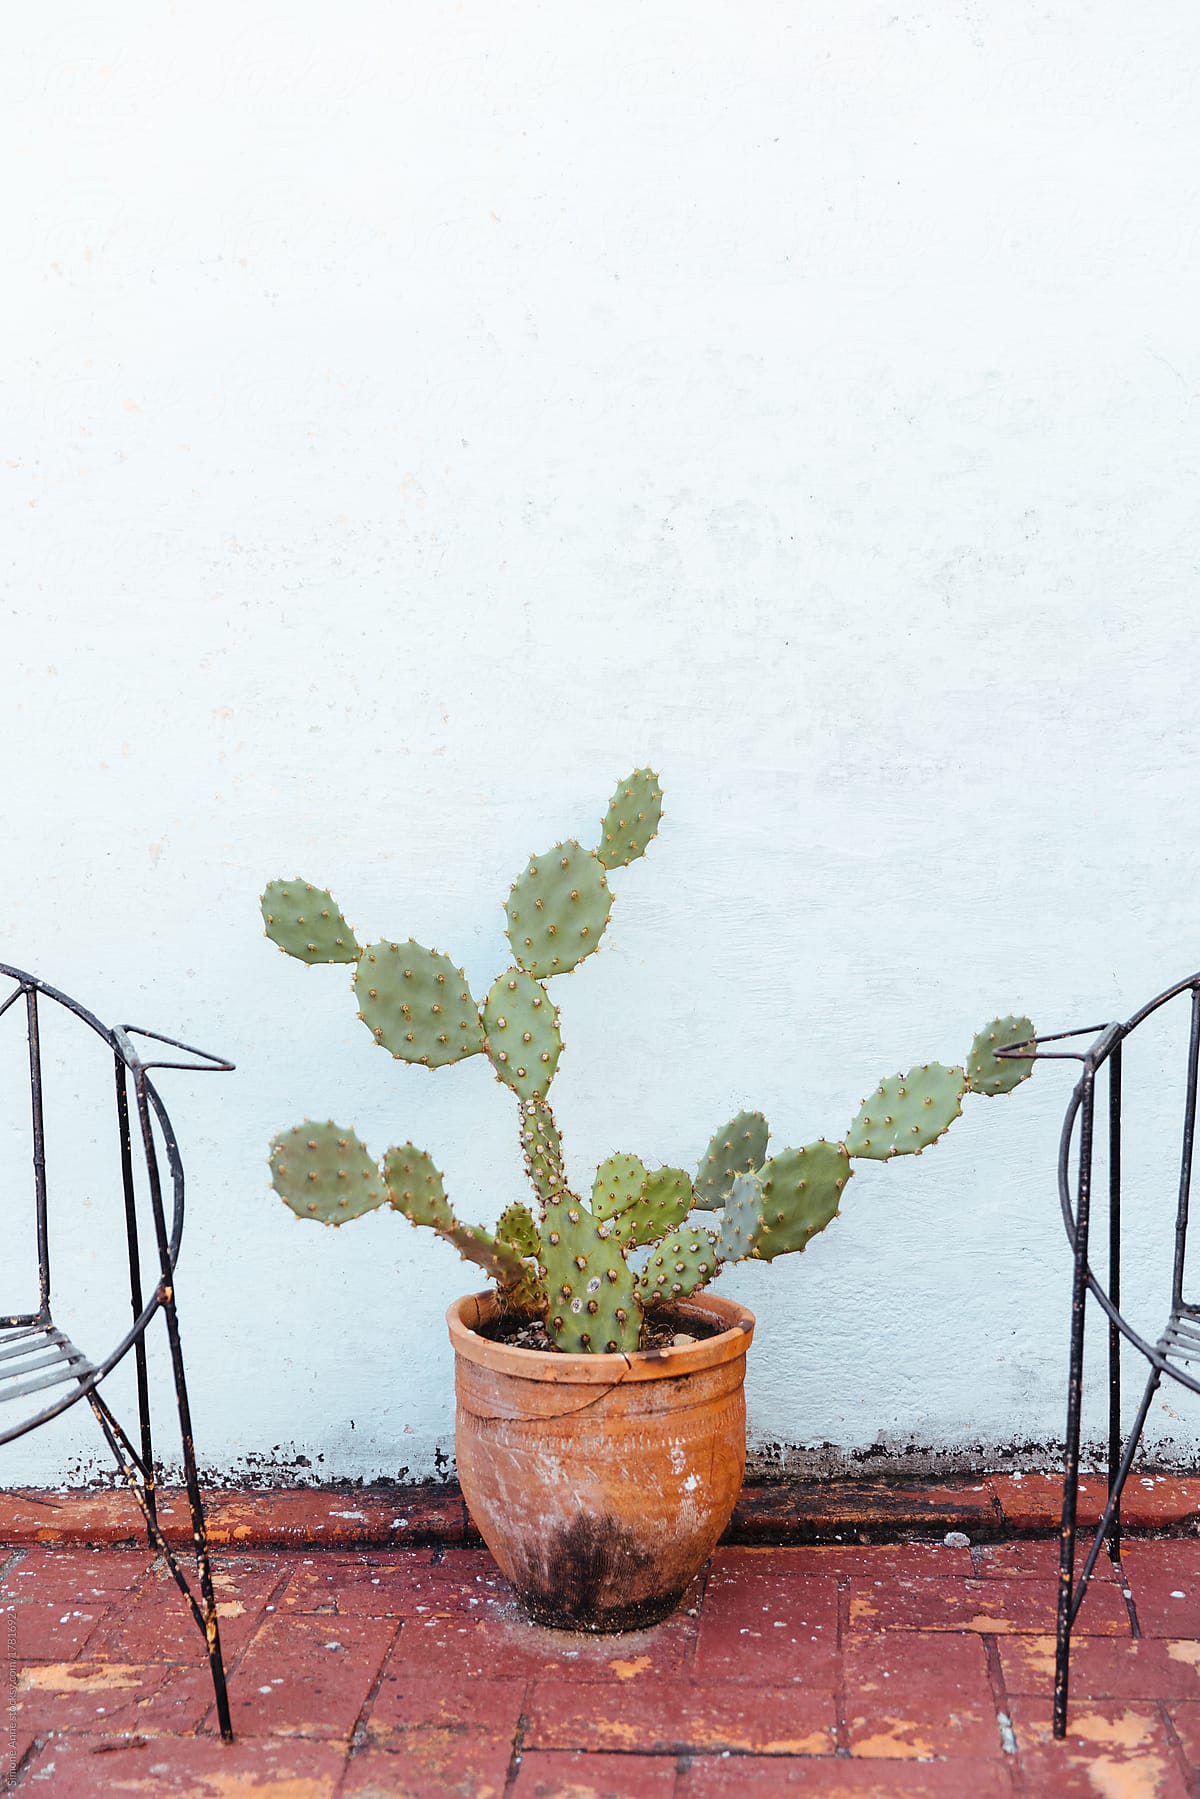 Cactus sits on the red, brick floor between two wire chairs